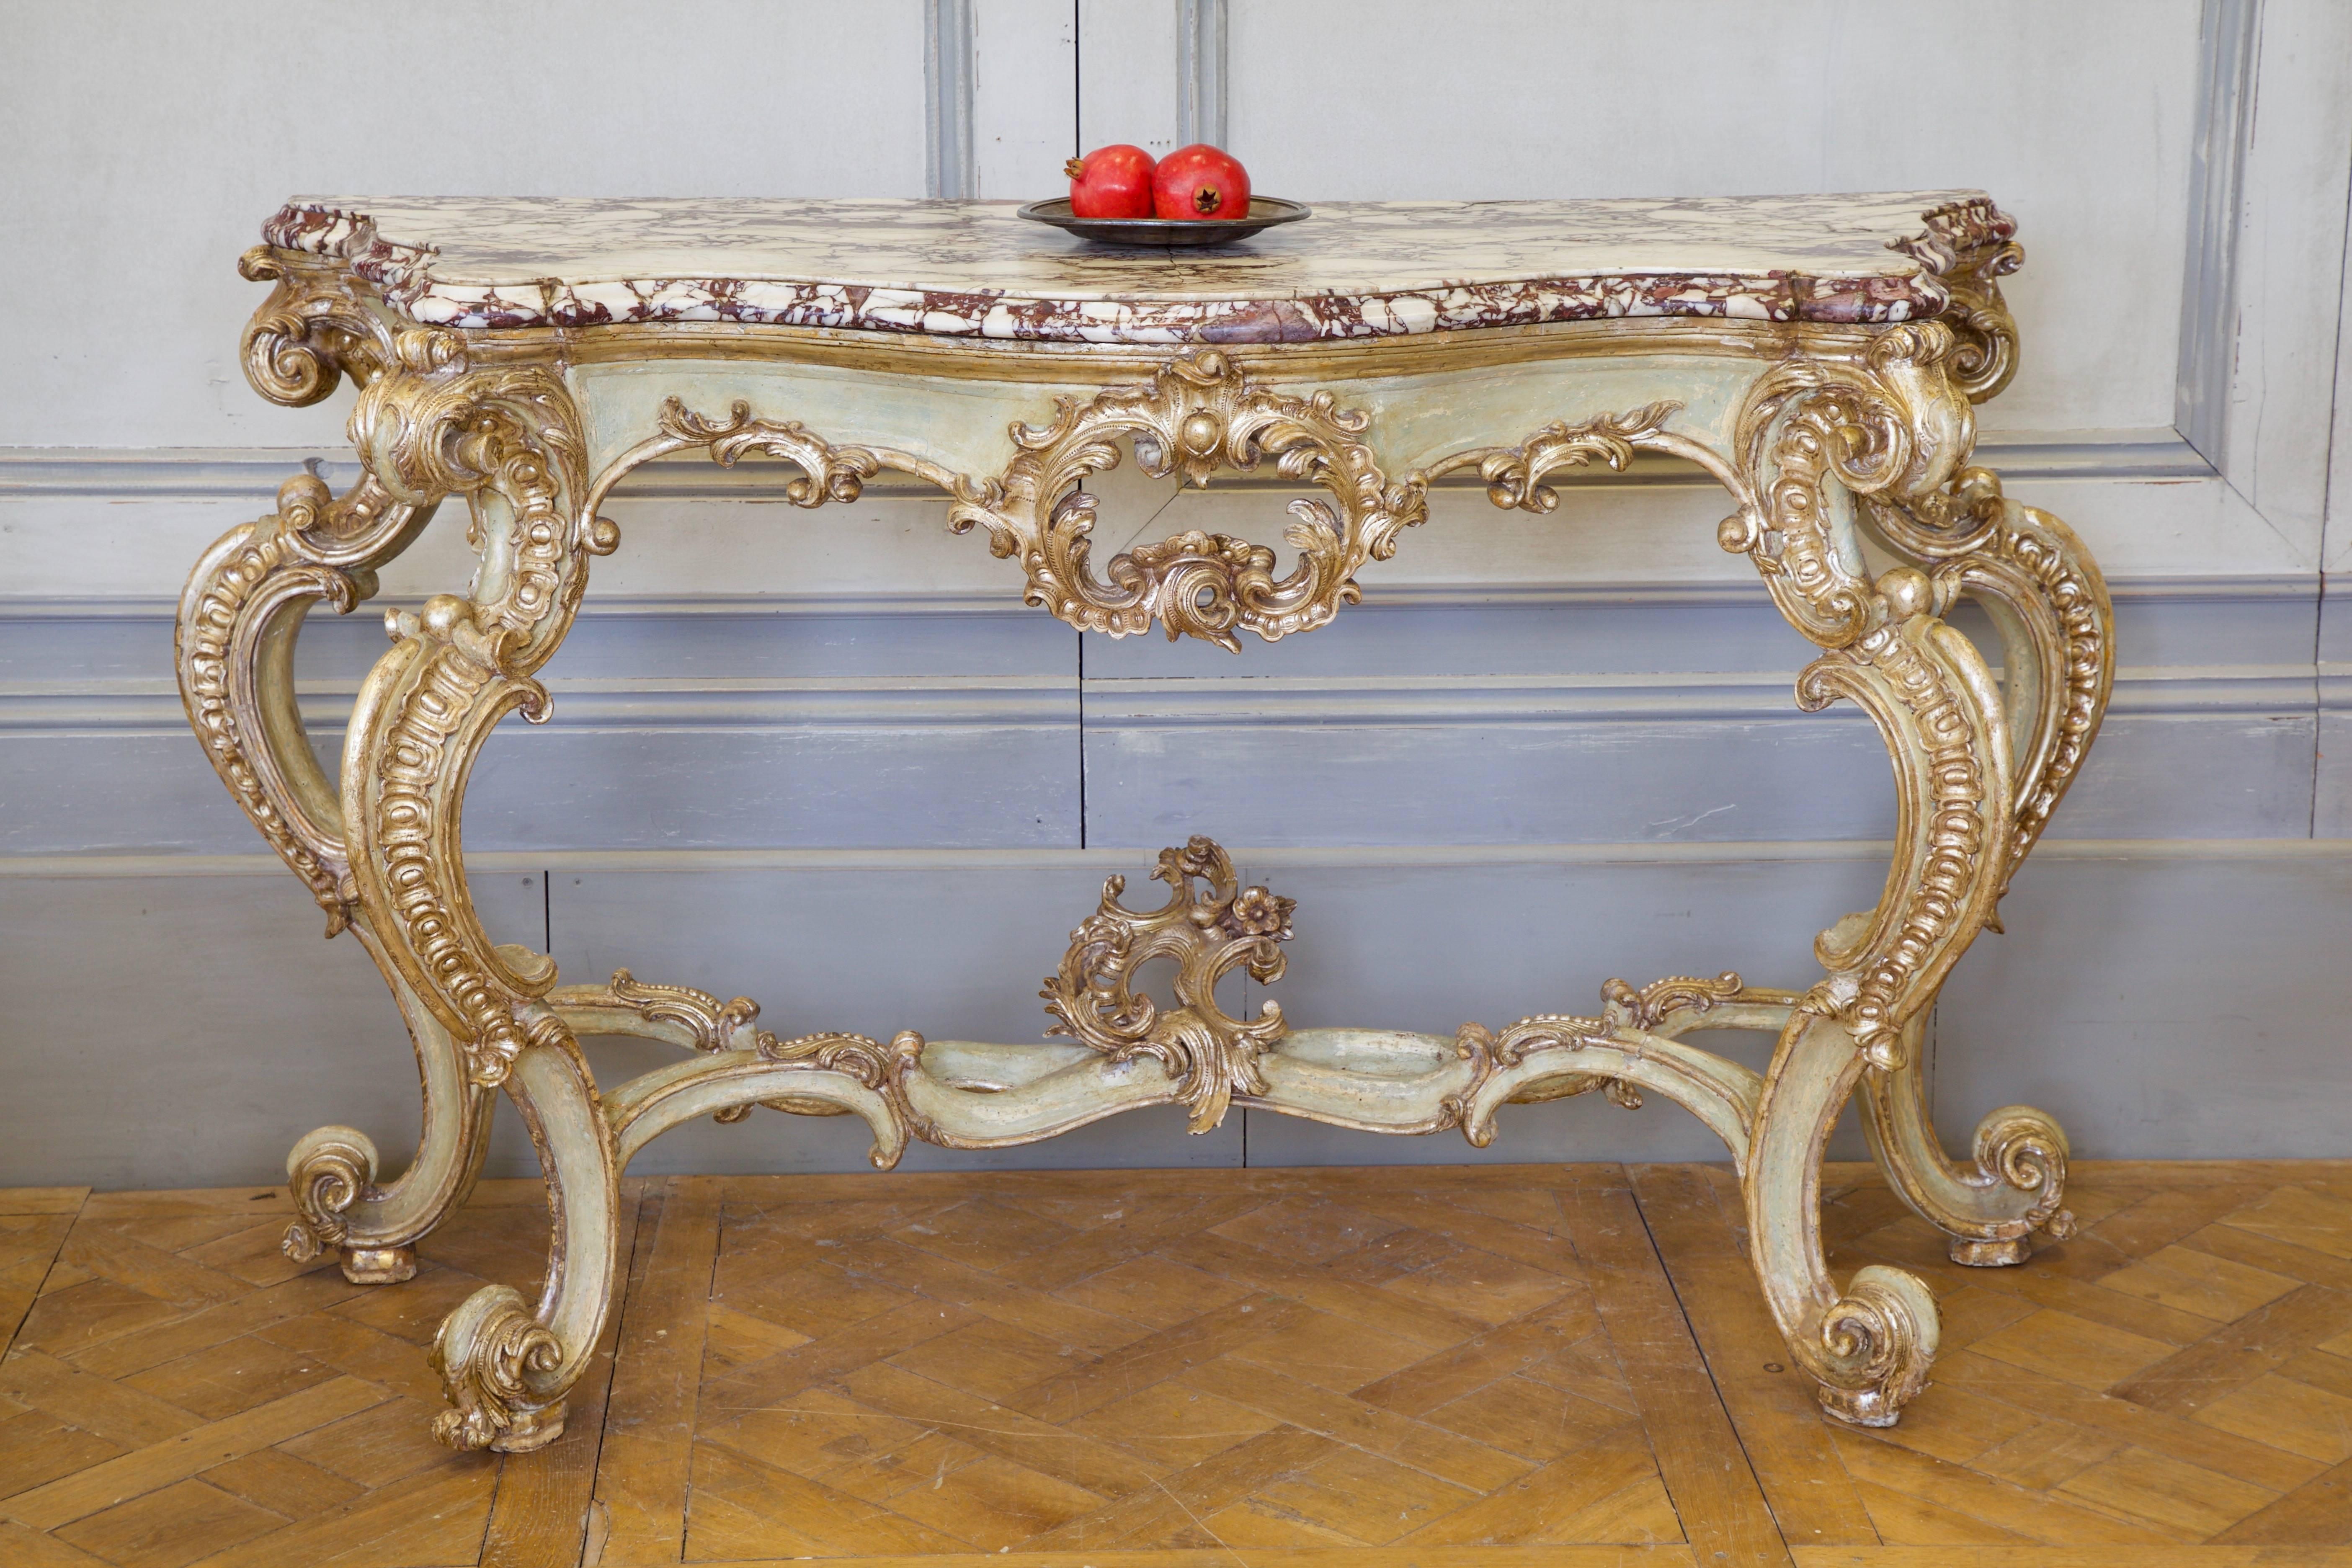 18th century LXV Italian console, impressively proportioned, featuring a statement, Breche Violet, bevelled marble top which makes a striking contrast to the naturally aged pistachio green patina, generously highlighted with silver gilding, all